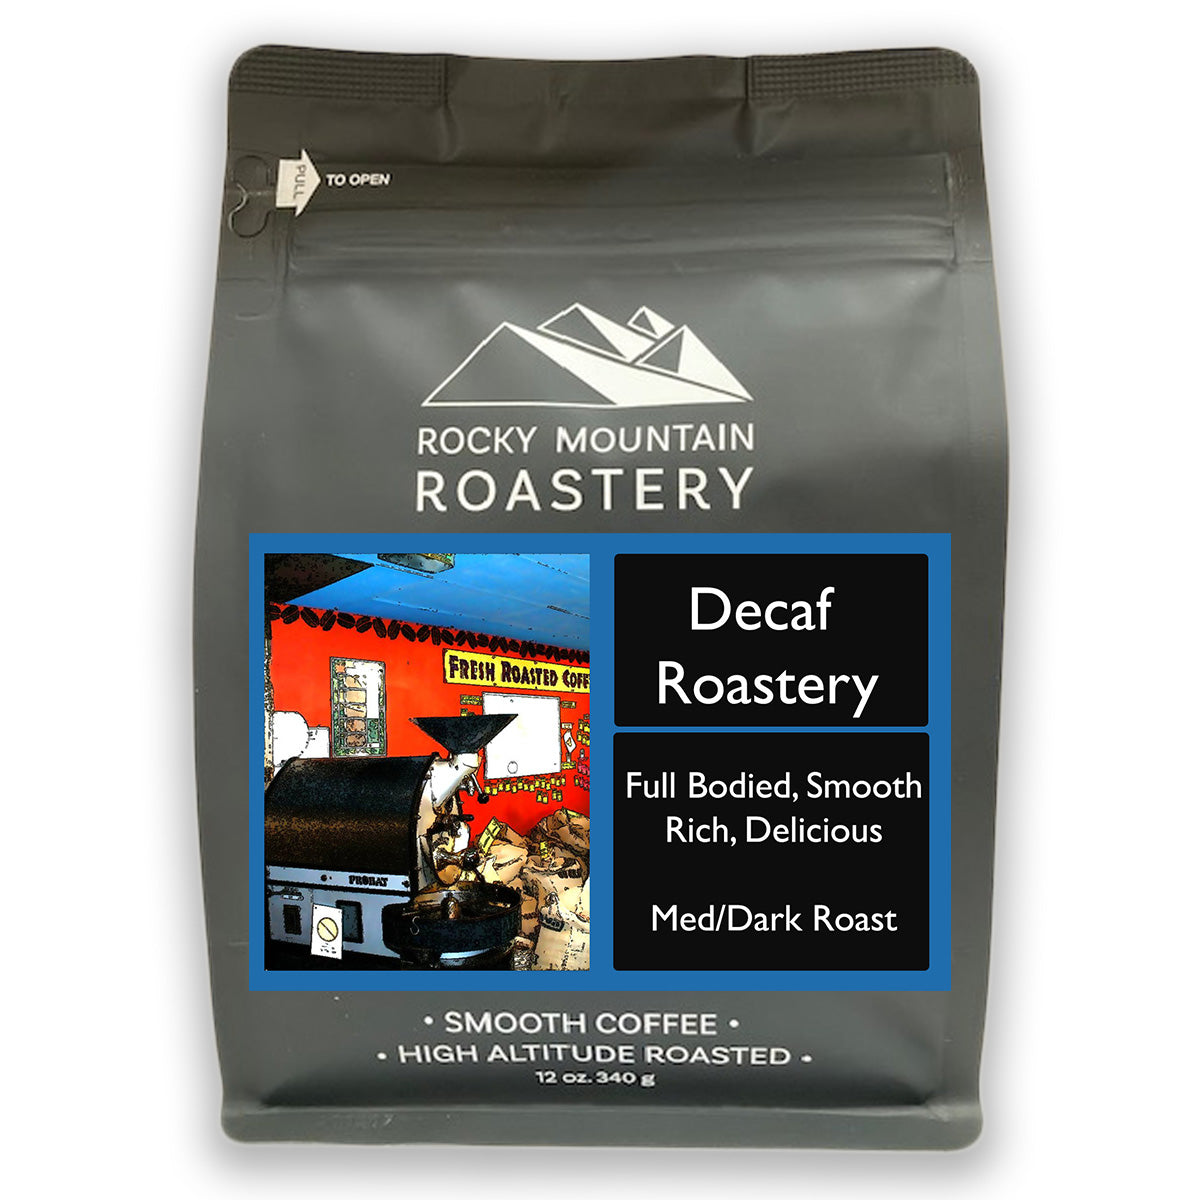 Picture of a bag of Decaf Roastery Coffee